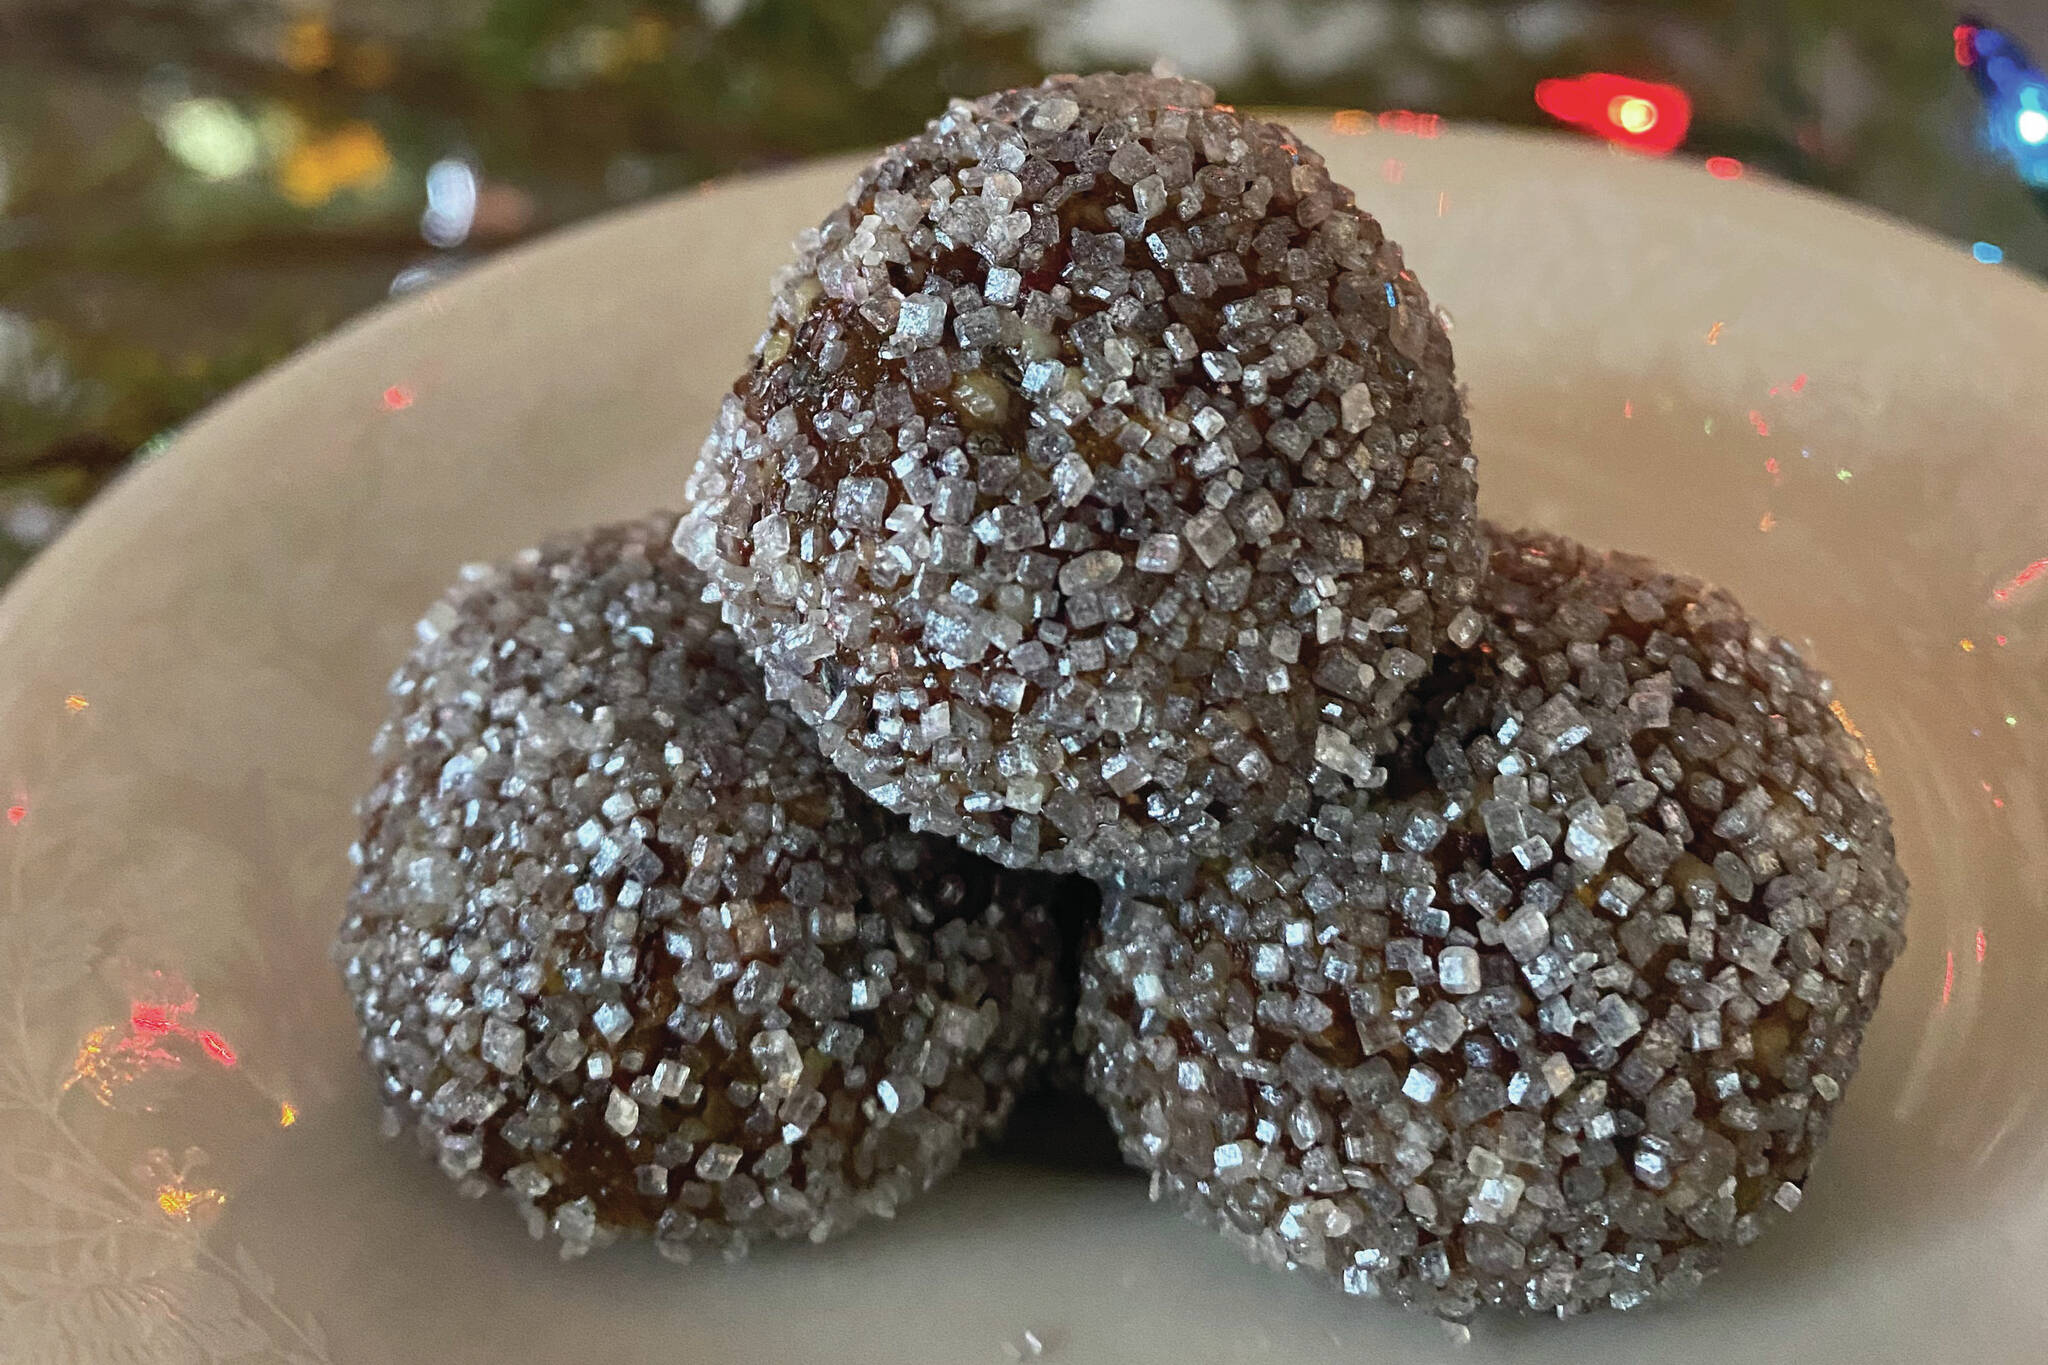 Sugarplums are made of toasted nuts and dried fruit with spices and honey, rolled in sparkling sugar. (Photo by Tressa Dale/Peninsula Clarion)